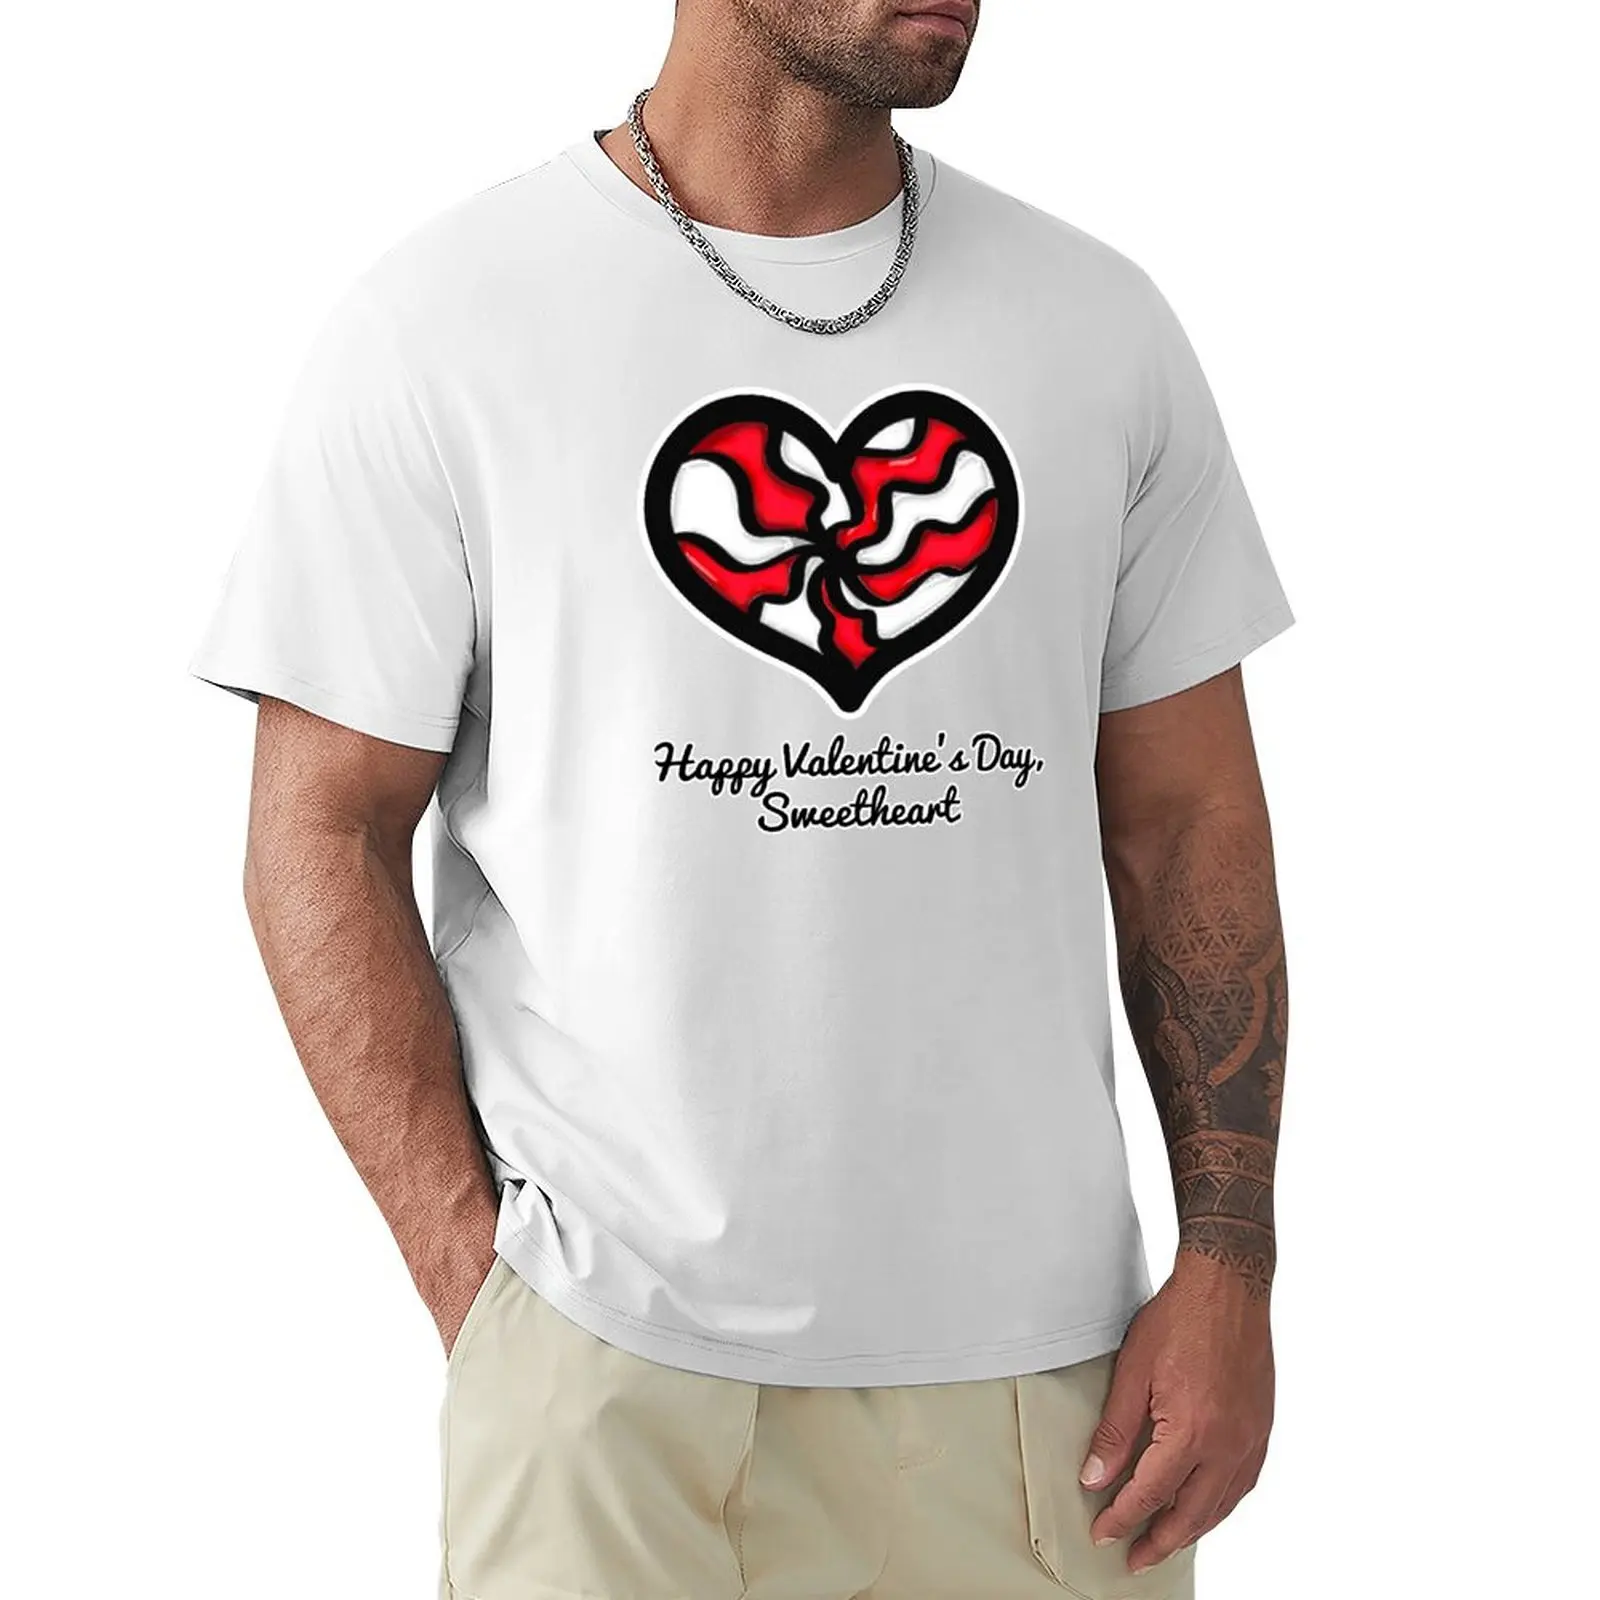 

Happy Valentine's Day Sweetheart T-Shirt Aesthetic clothing funnys mens white t shirts